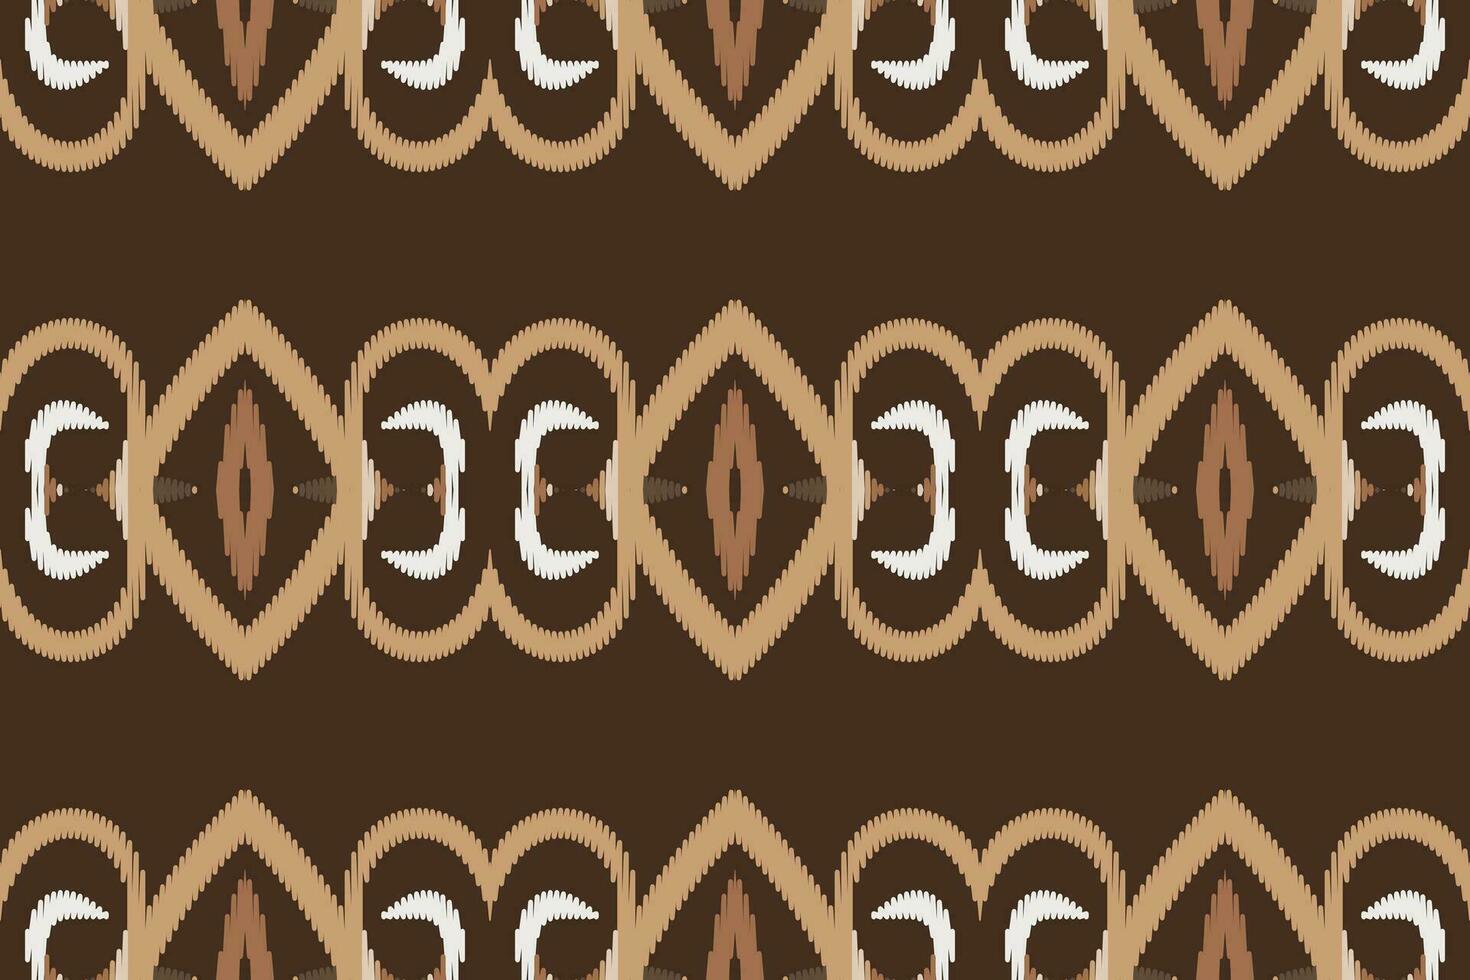 Ikat Seamless Pattern Embroidery Background. Ikat Vector Geometric Ethnic Oriental Pattern Traditional. Ikat Aztec Style Abstract Design for Print Texture,fabric,saree,sari,carpet.